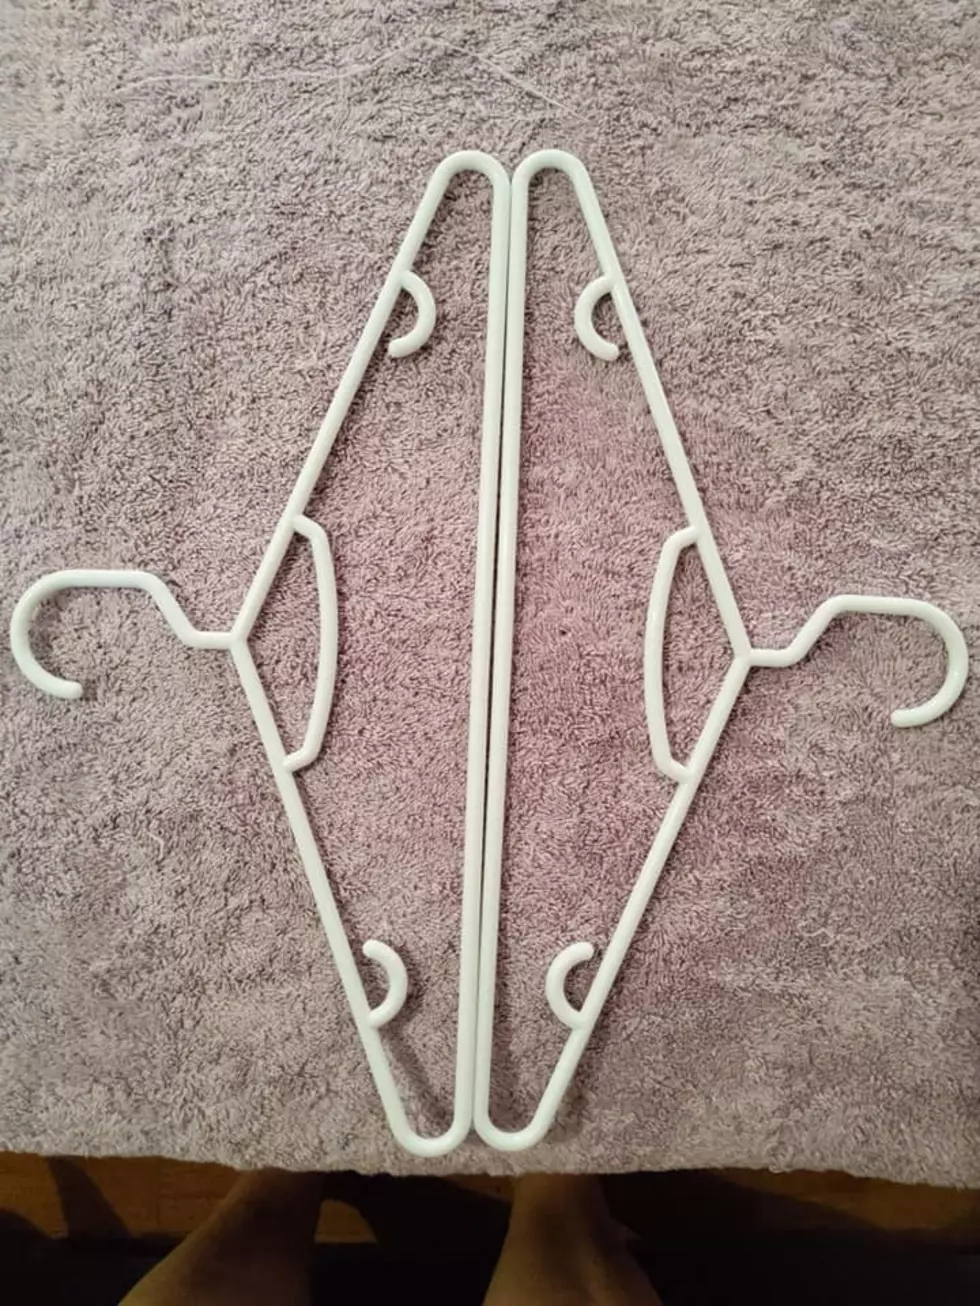 How to Make a Clothes Hanger Christmas Star